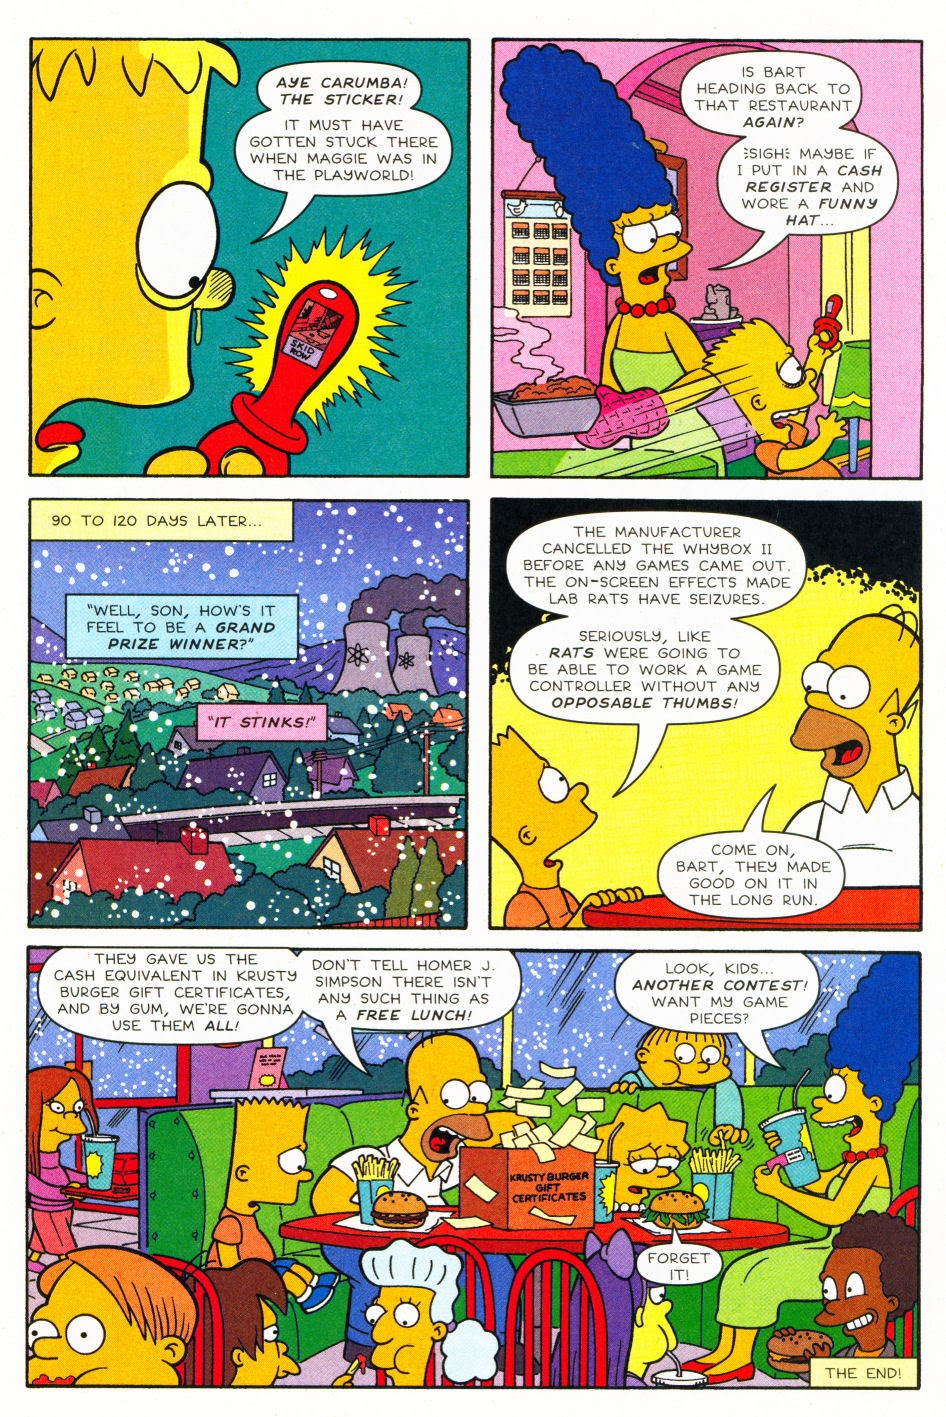 Read online Bart Simpson comic -  Issue #27 - 29